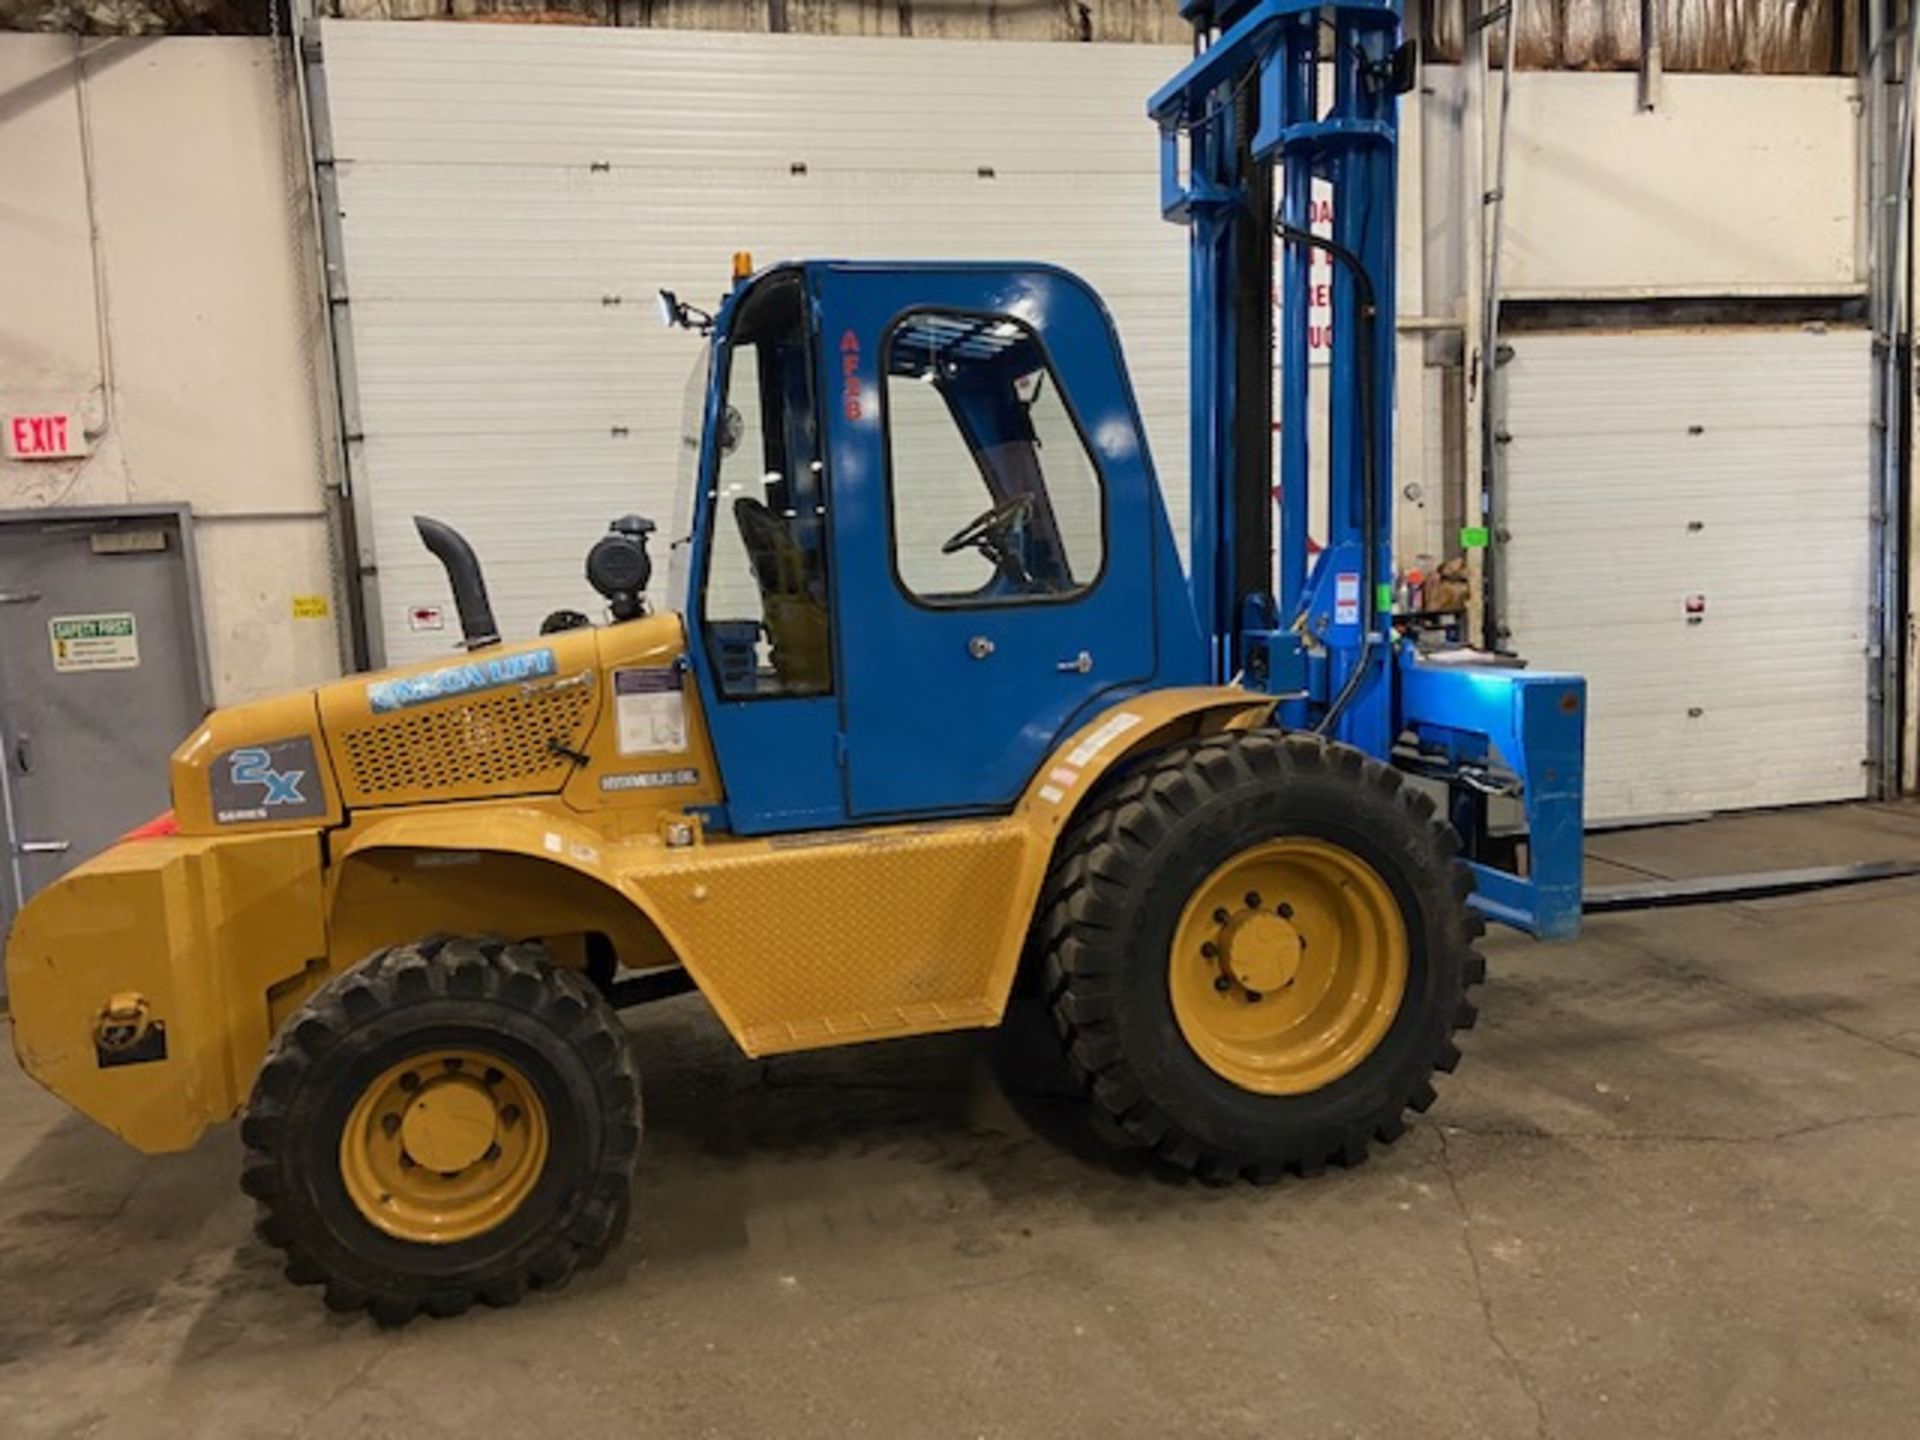 FREE CUSTOMS - 2014 OMEGA 10,000lbs Capacity OUTDOOR Forklift Diesel with 6' forks sideshift & - Image 3 of 7